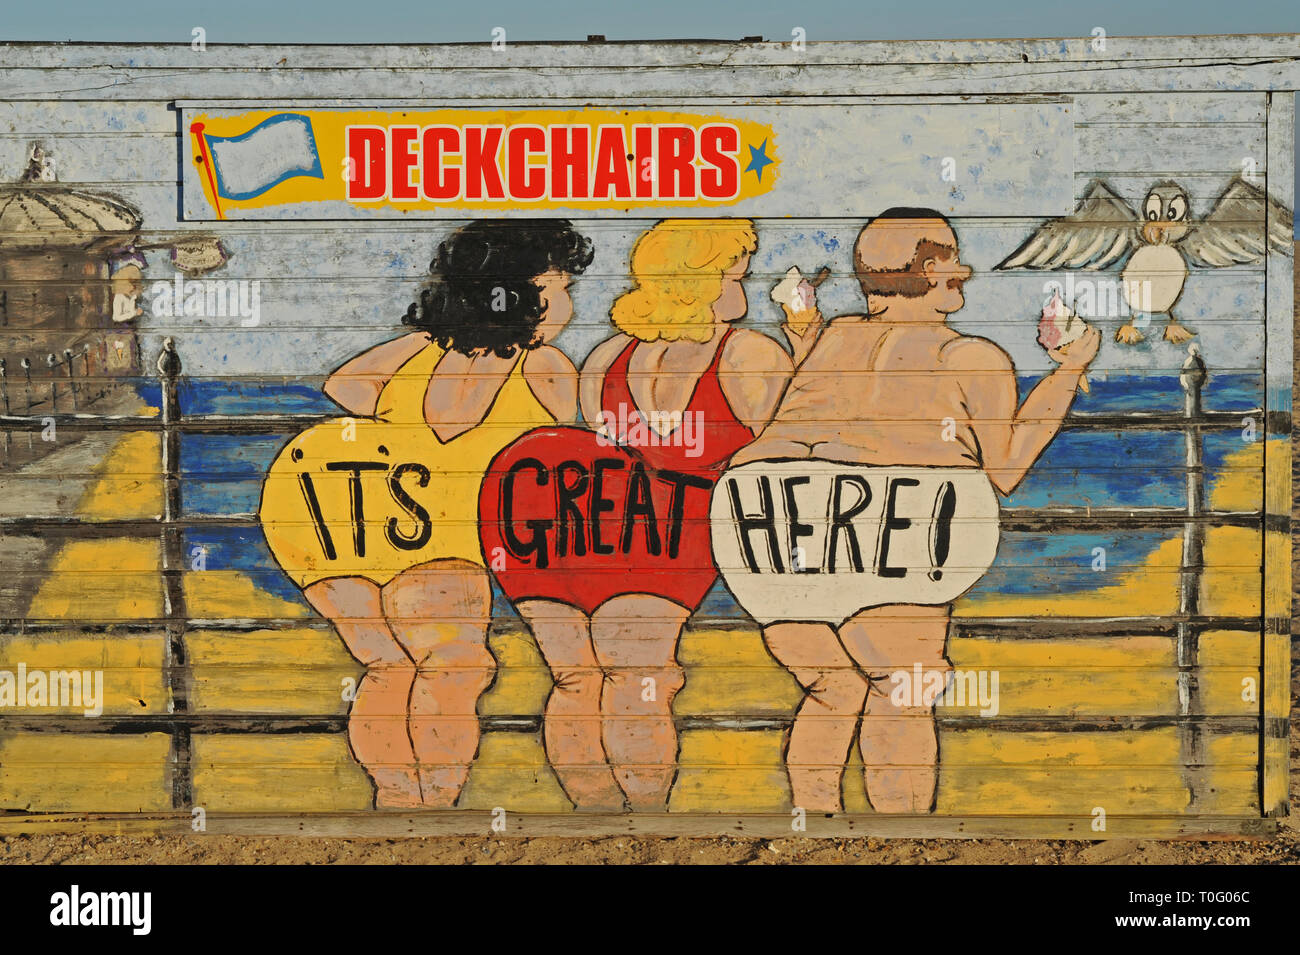 Saucy artwork on a timber building on the beach at Great Yarmouth Stock Photo